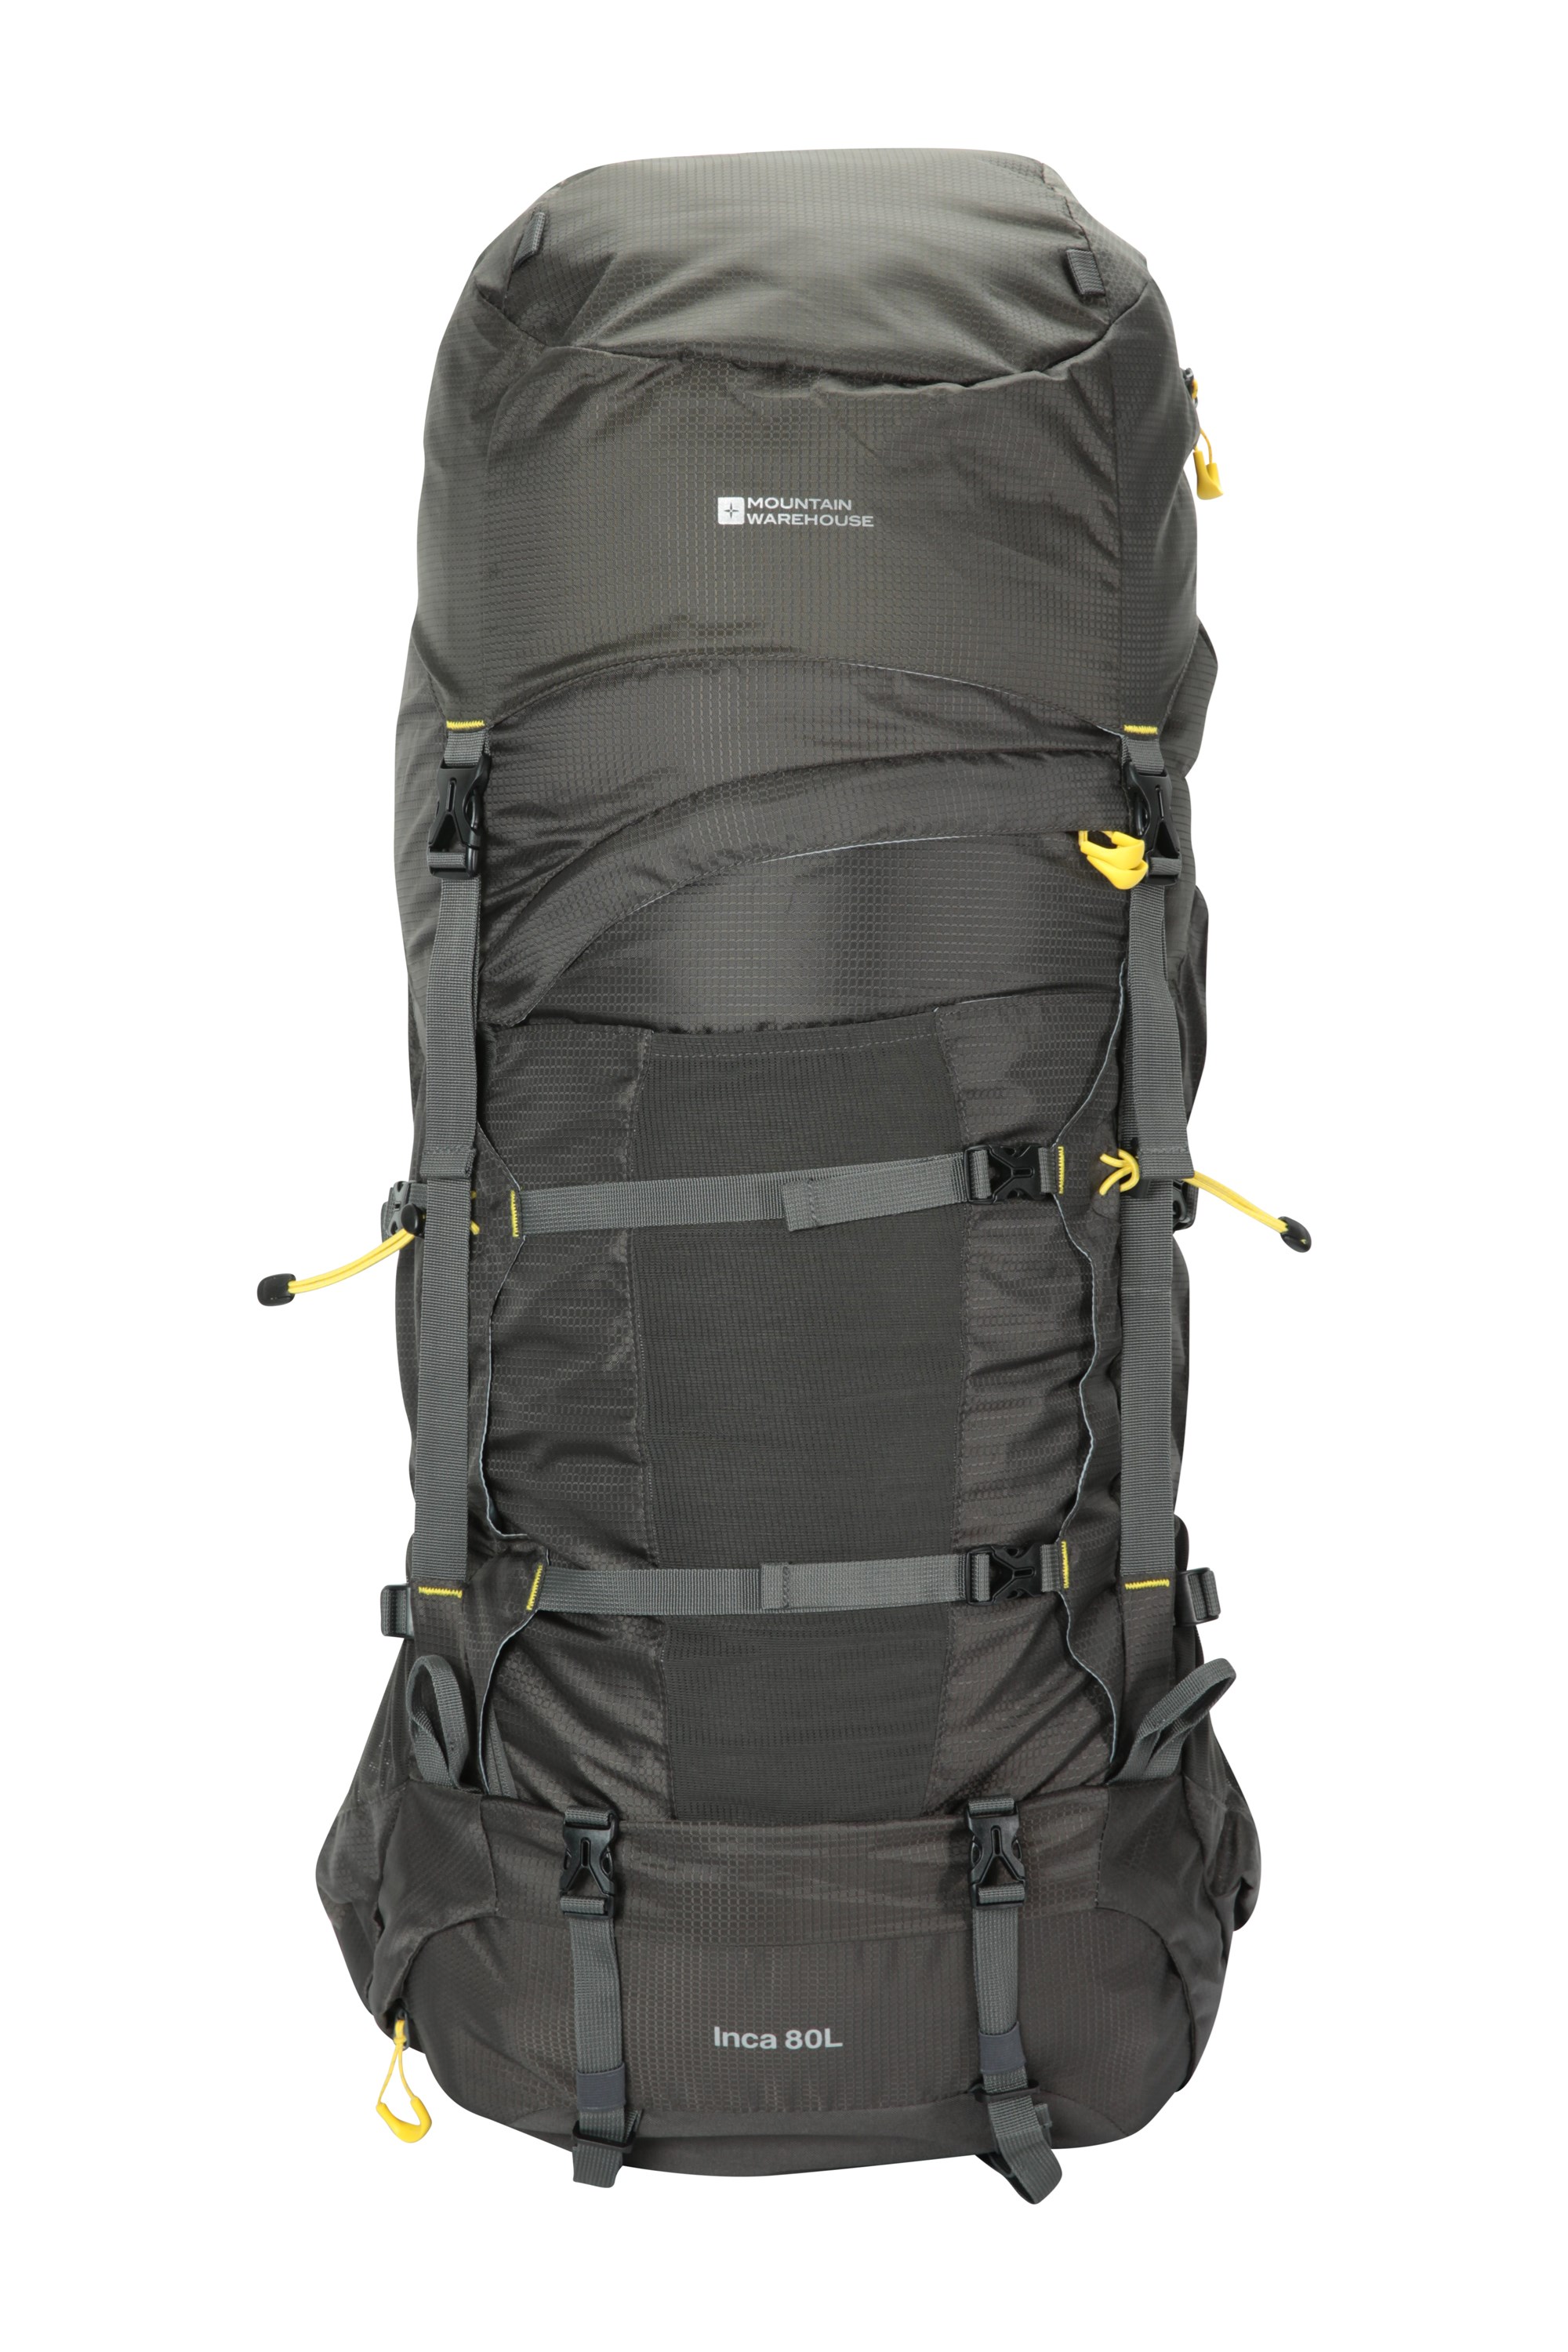 Inca Extreme 80L Backpack - Brown